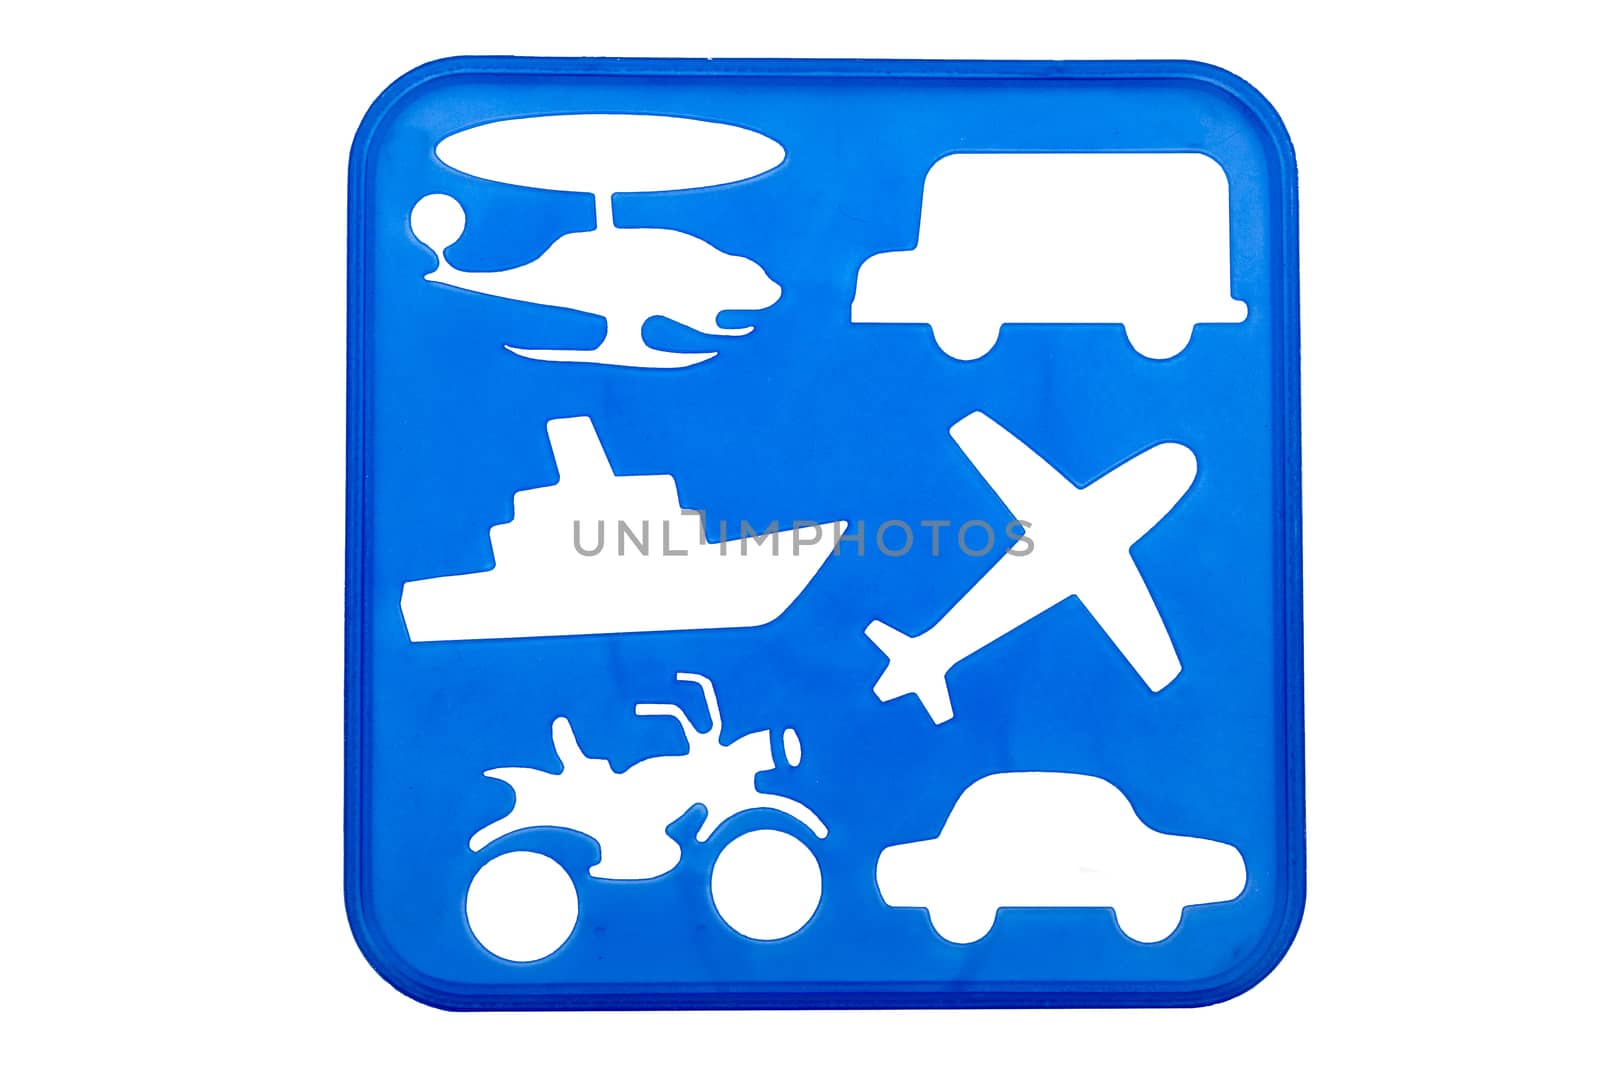 Transport stencil shapes on a blue background